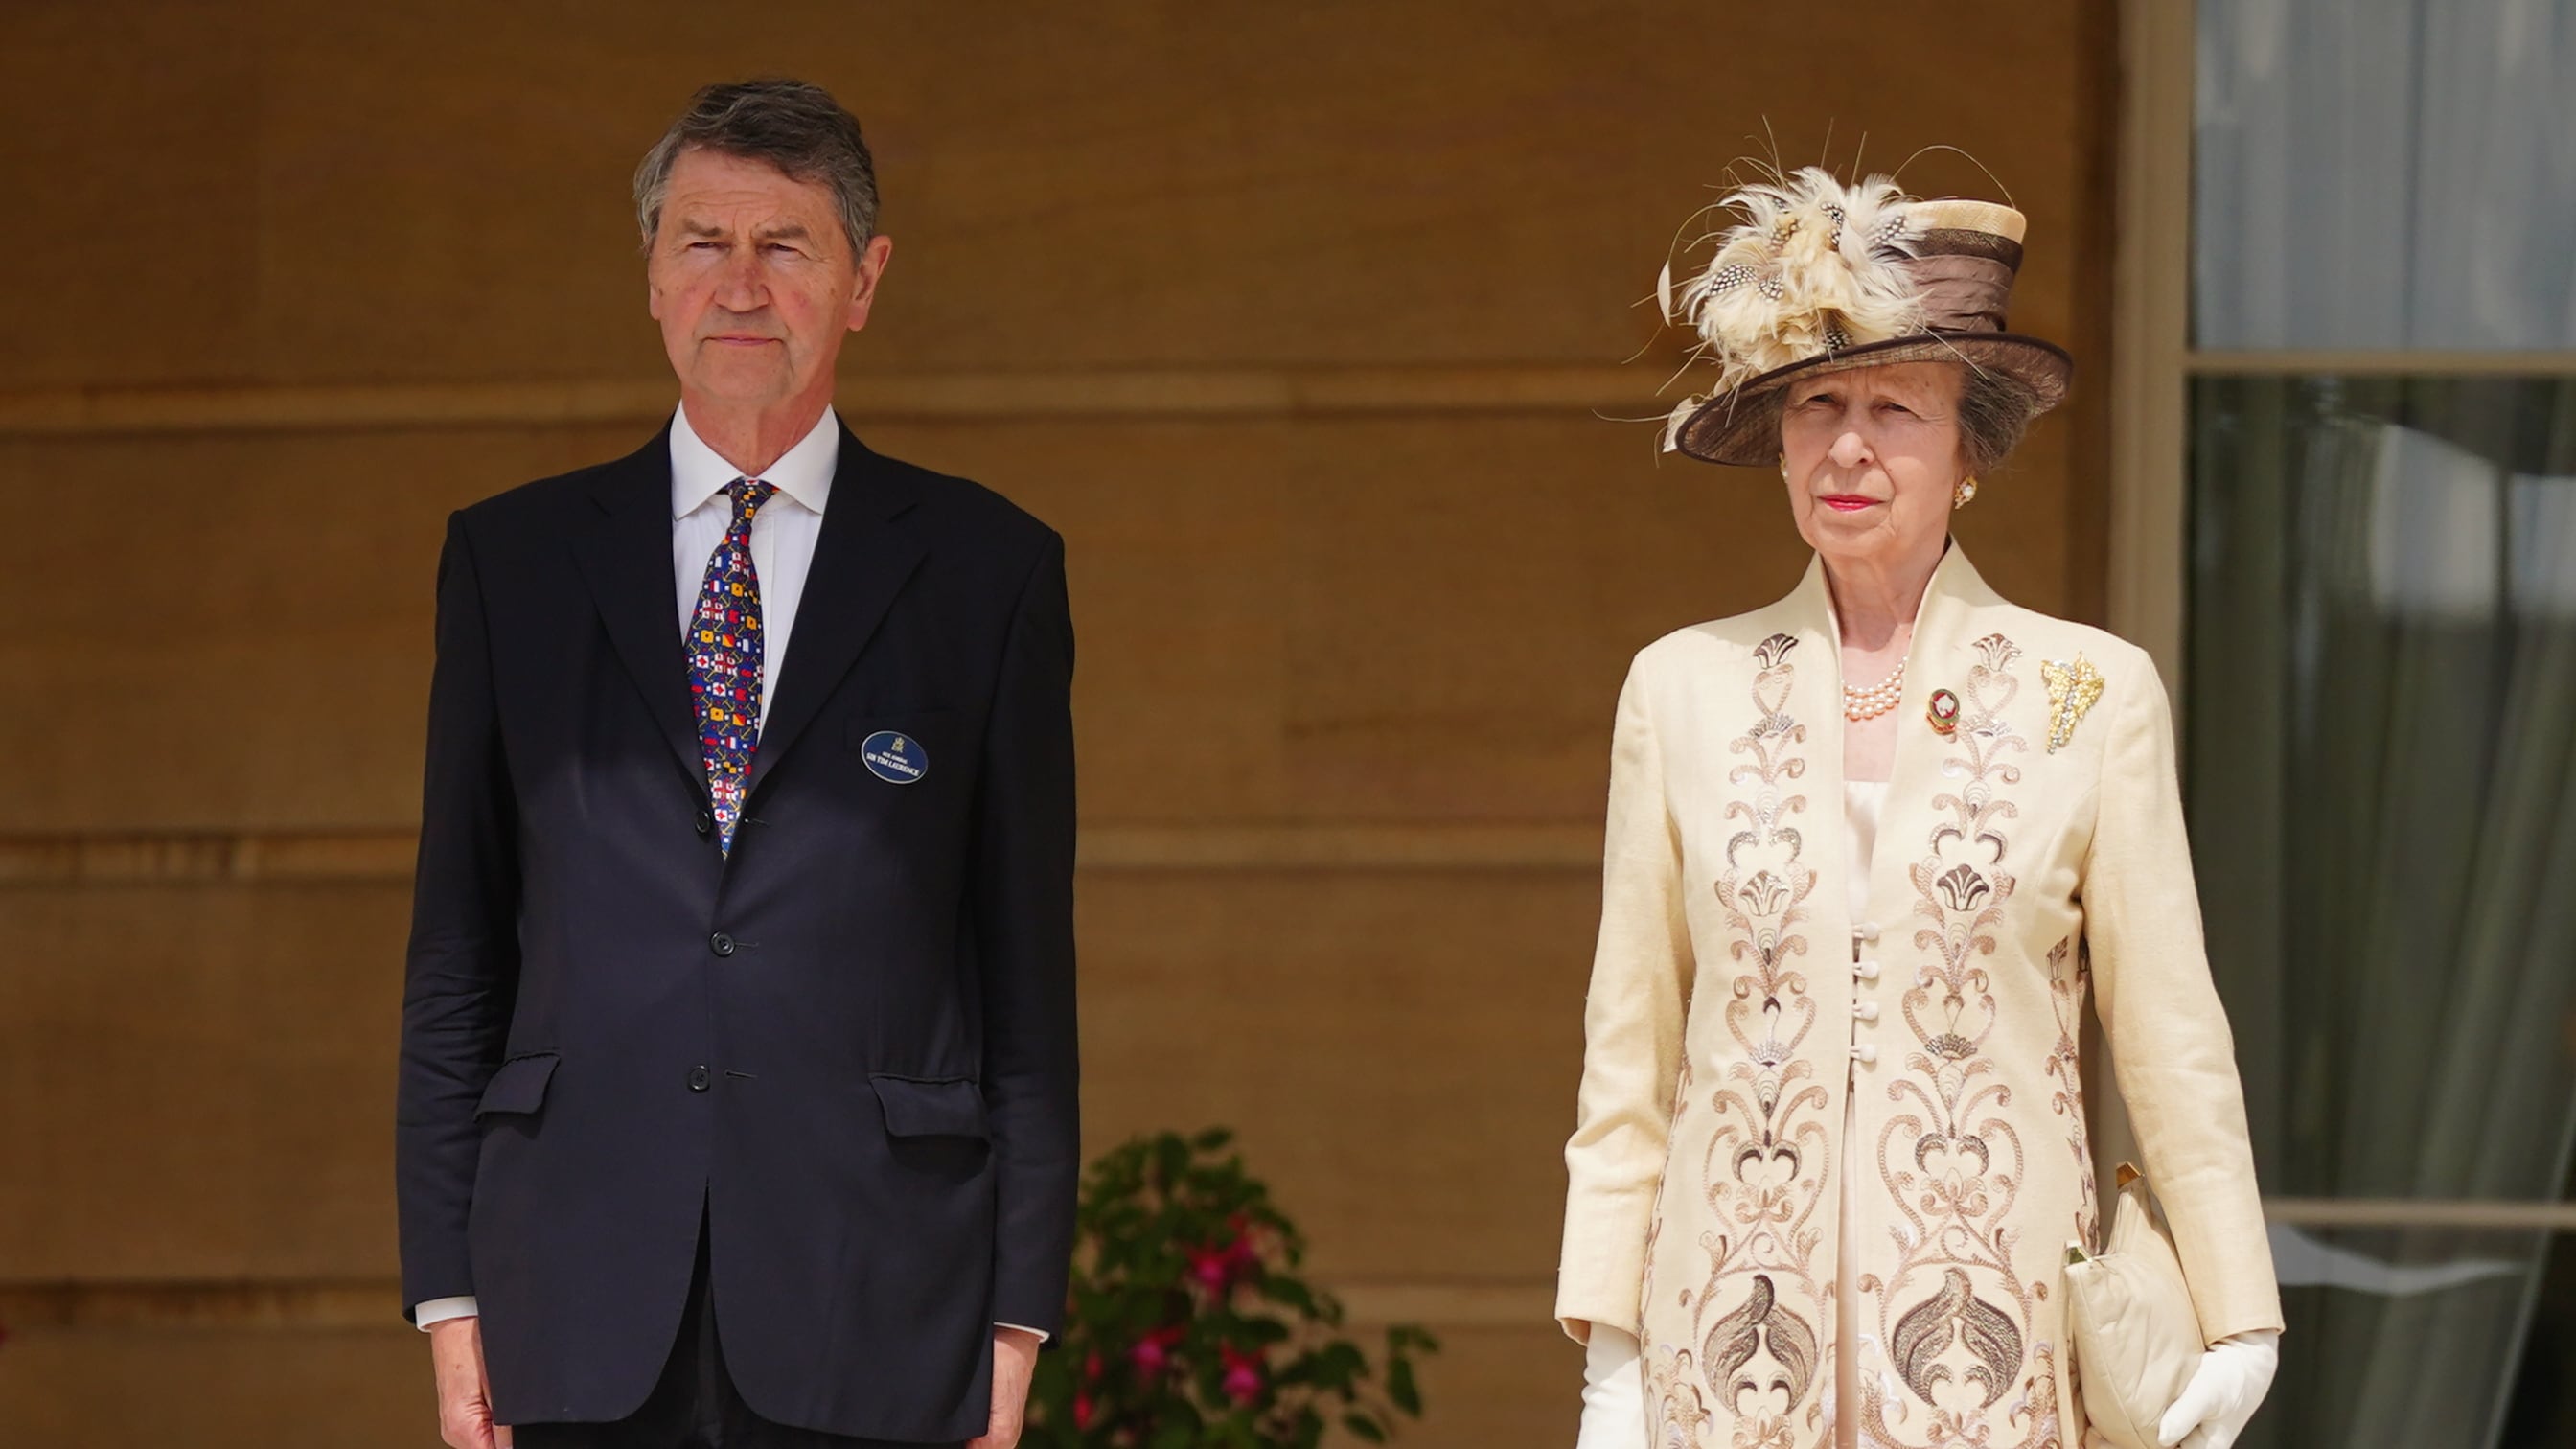 The Princess Royal was visited by her husband Vice Admiral Sir Tim Laurence